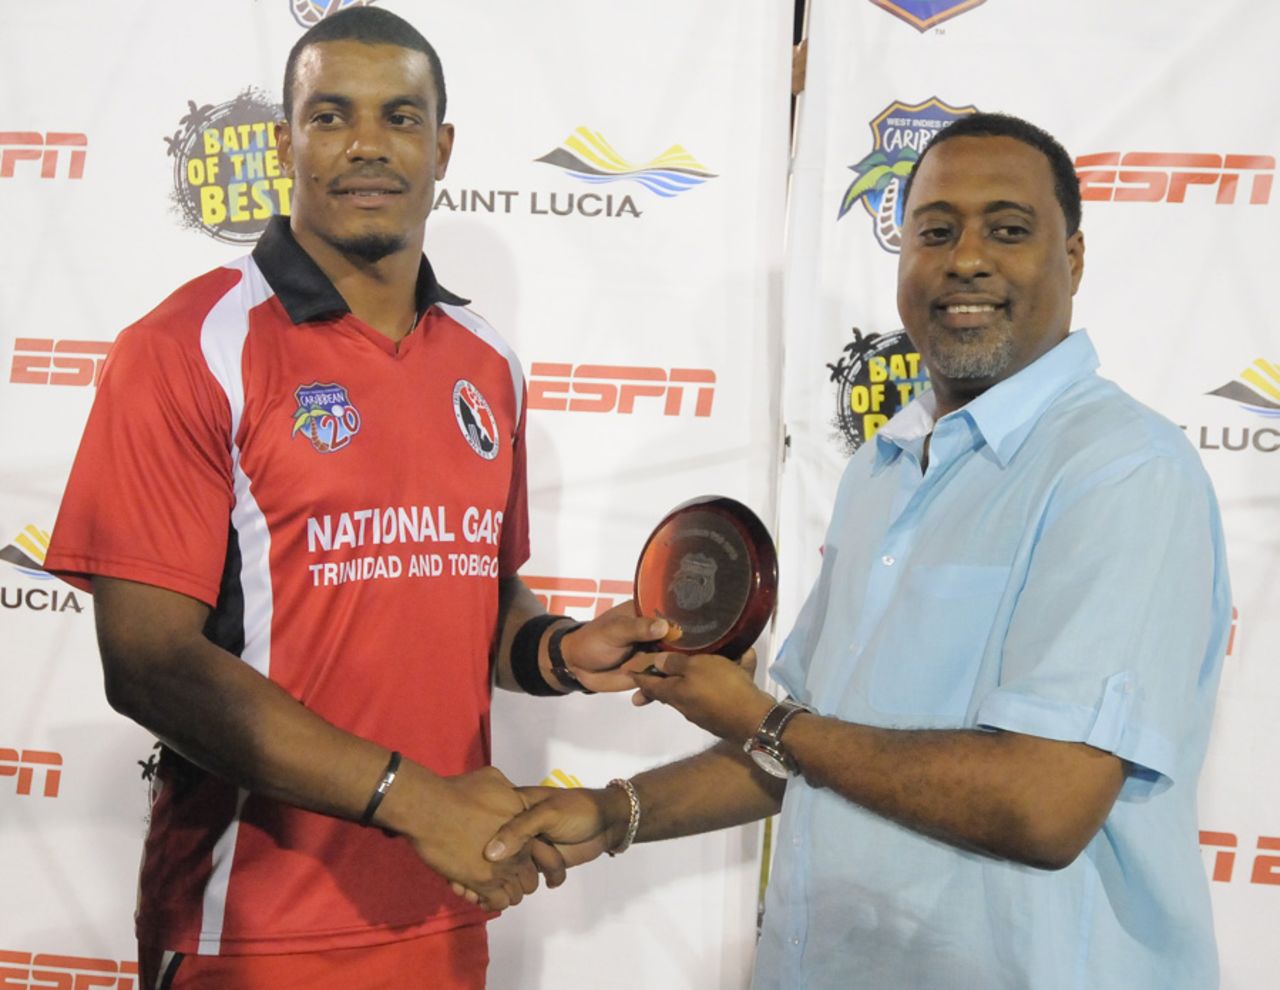 Shannon Gabriel was Man of the Match in the Caribbean T20 final, Guyana v Trinidad & Tobago, Caribbean T20, final, St Lucia, January 20, 2013